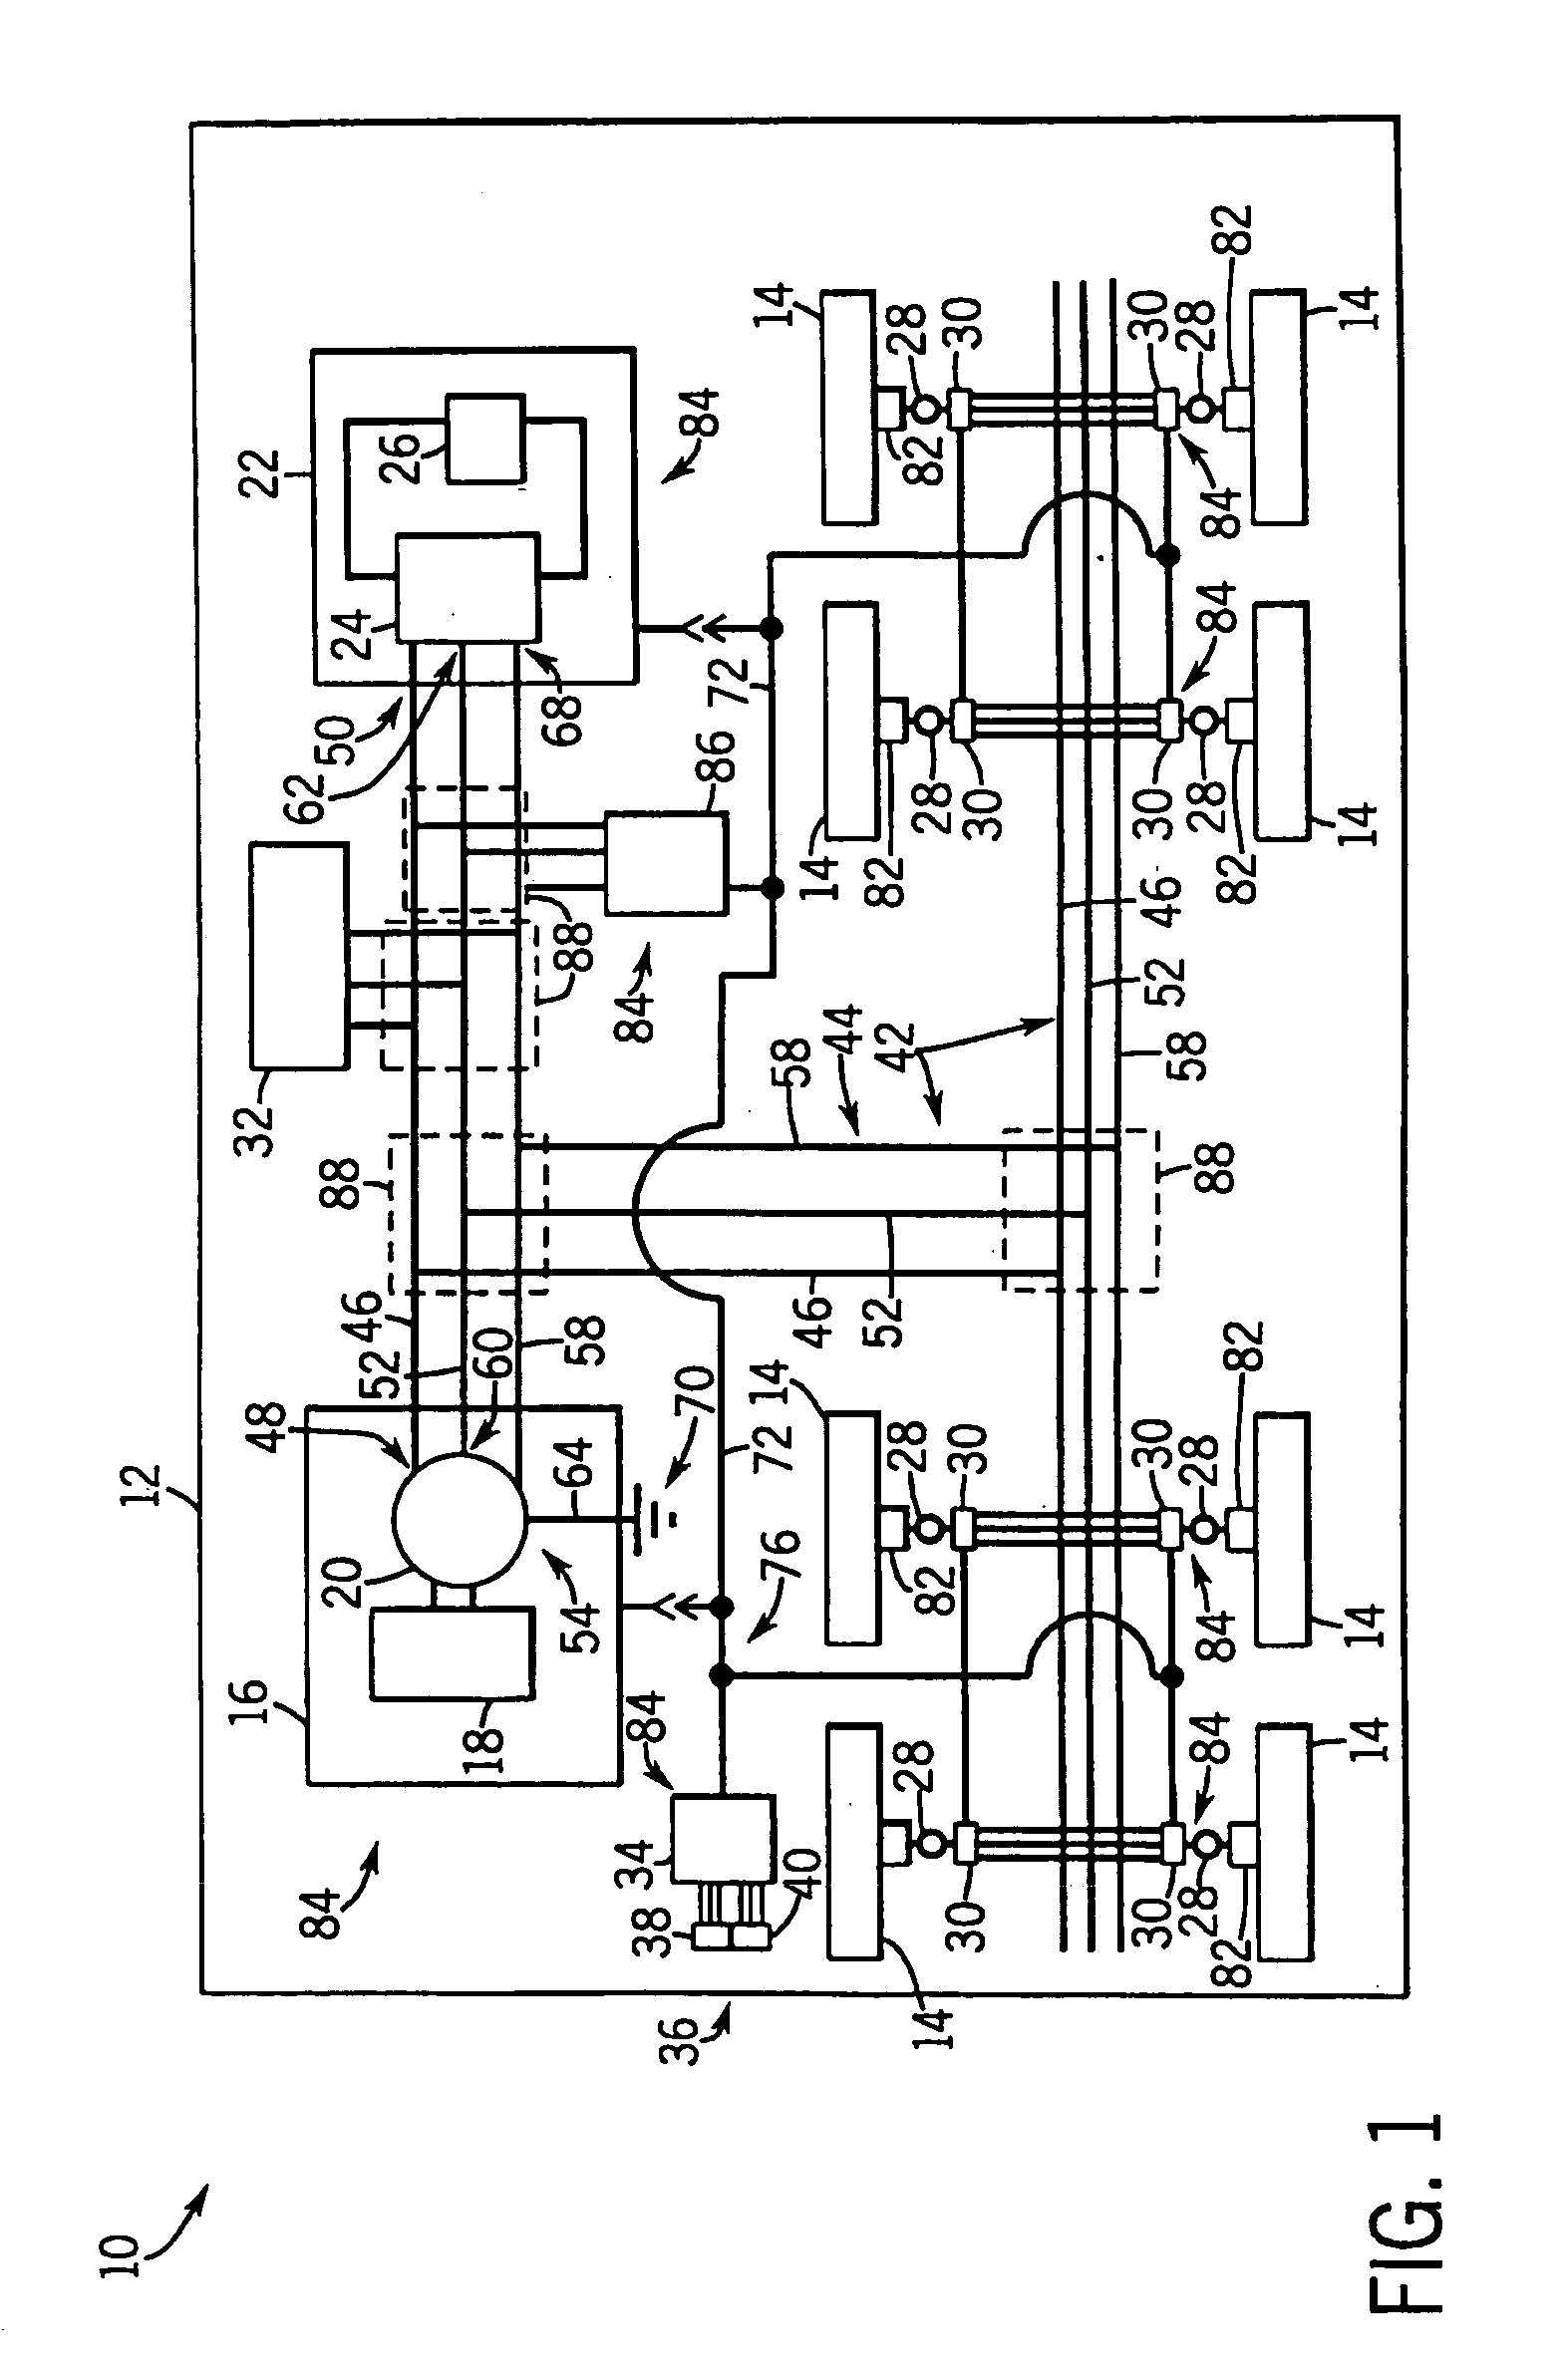 A/C bus assembly for electronic traction vehicle